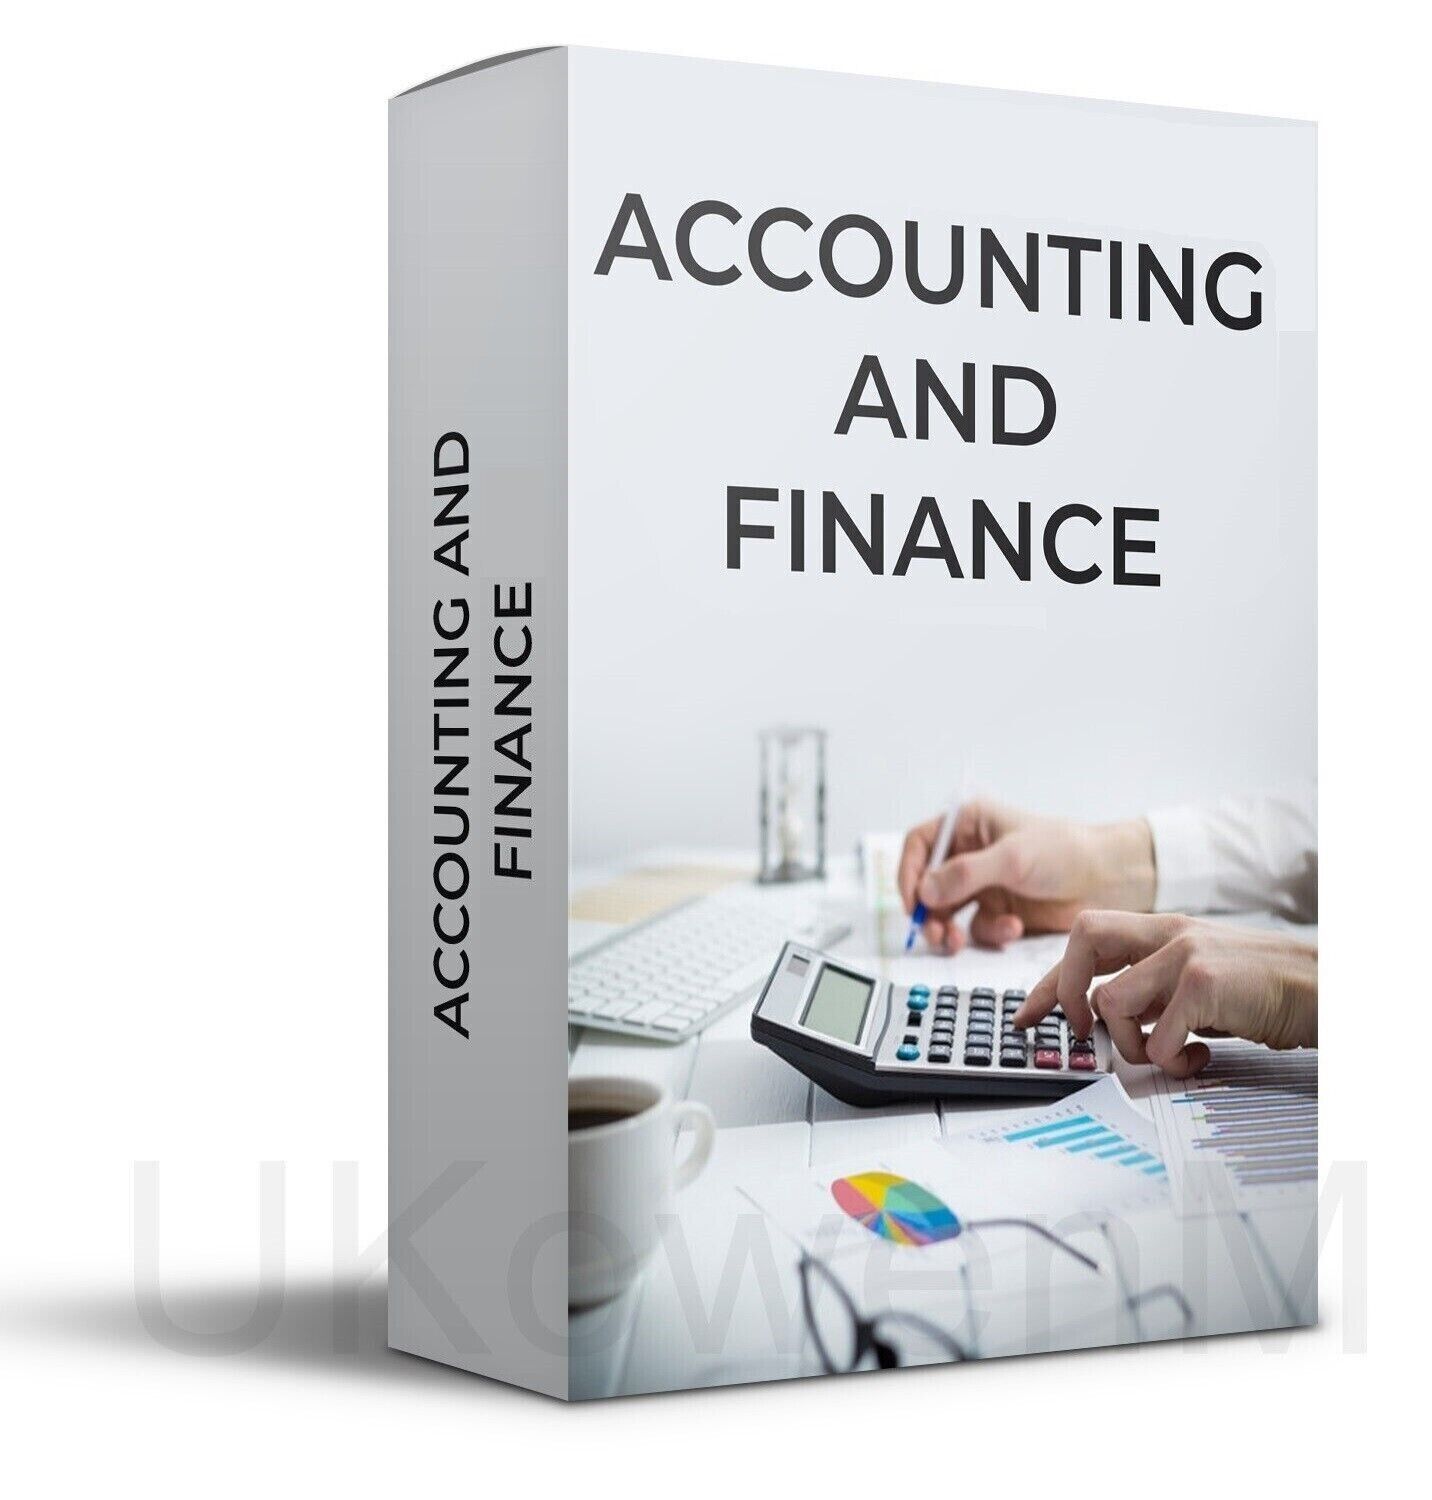 Accounting Small Business Finance Software Bookkeeping Tax Self Employed VAT